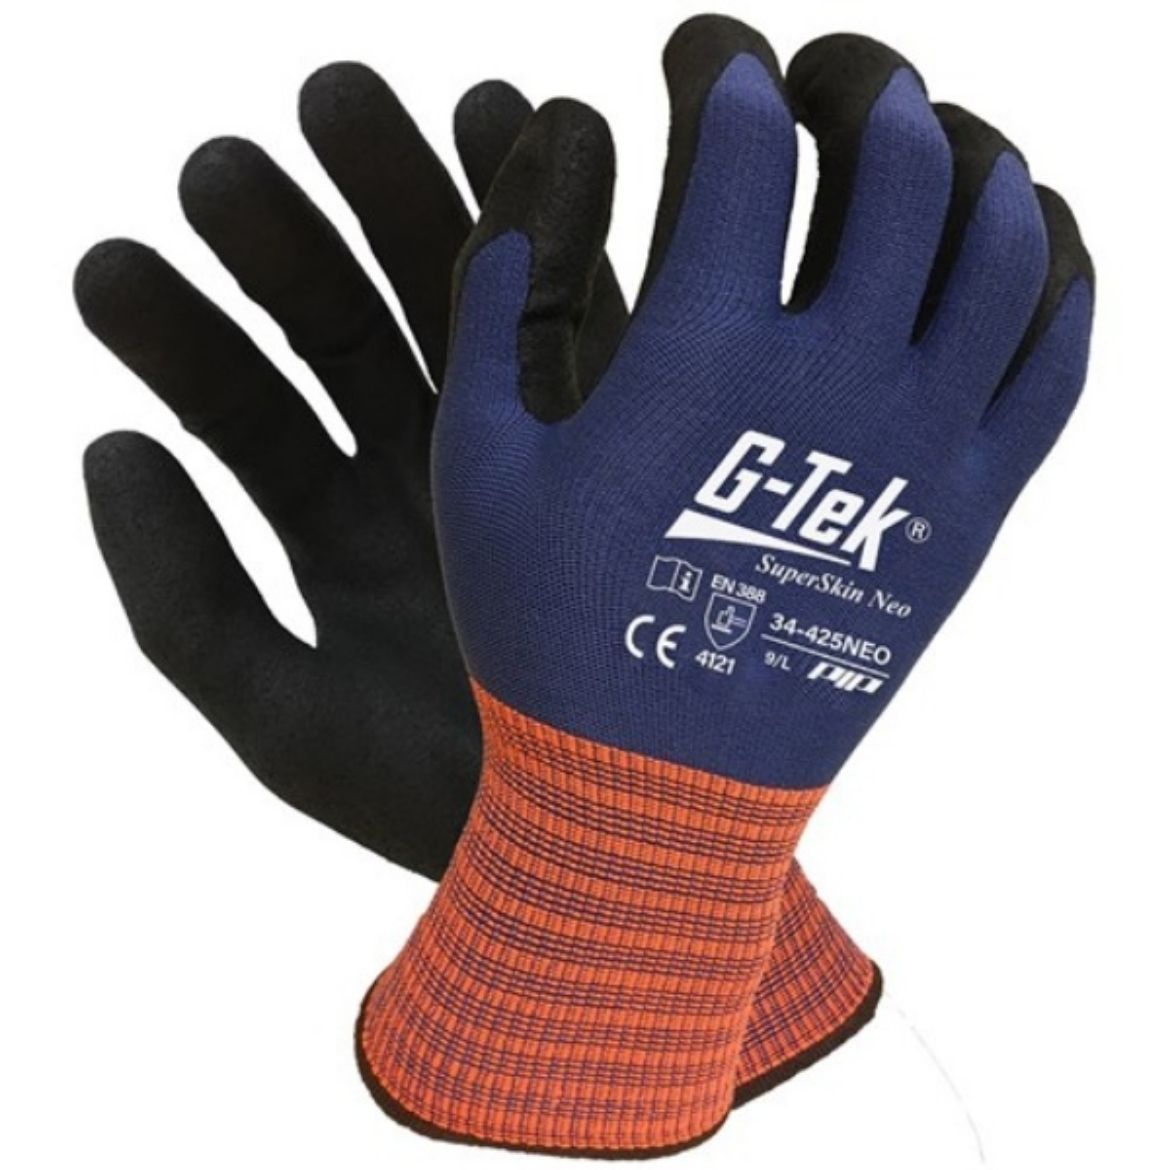 Picture of G-TEK (GUARDTEK) SUPERSKIN NEO GLOVES. MOQ - 12 PAIRS.  AVAILABLE IN SIZES 6 TO 12.